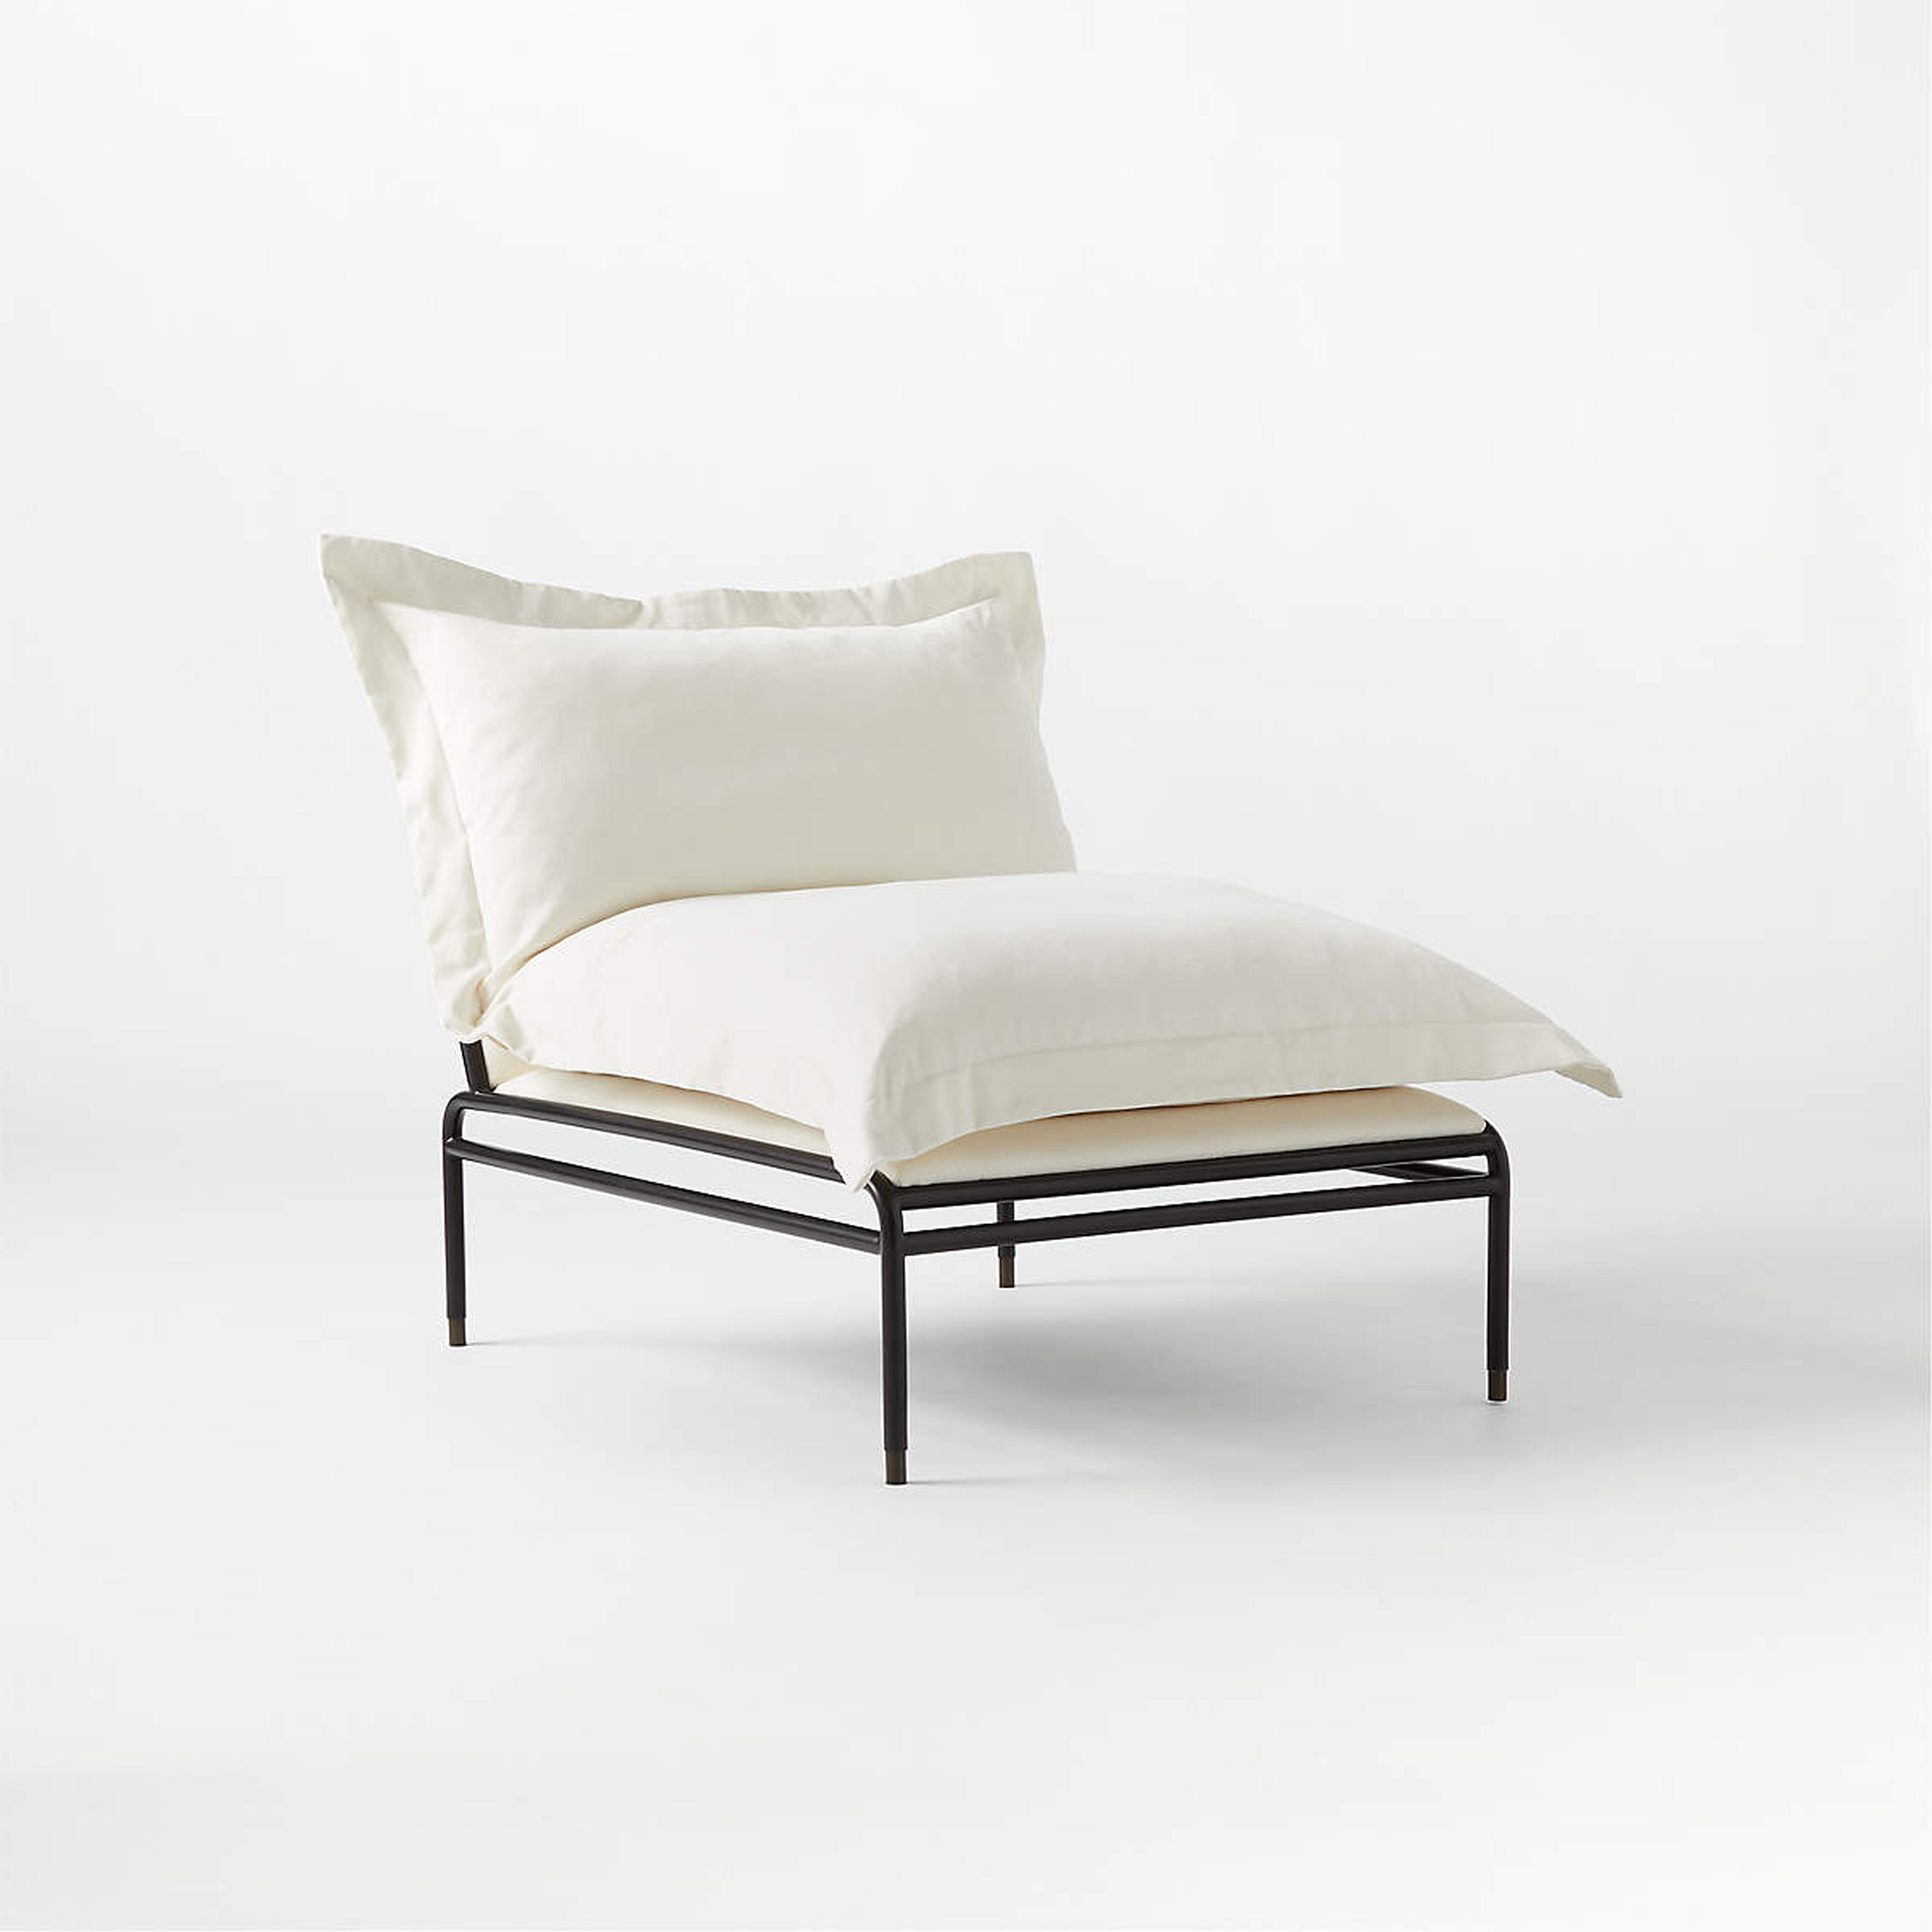 Pillow Lounge Chair Nomad Snow - CB2